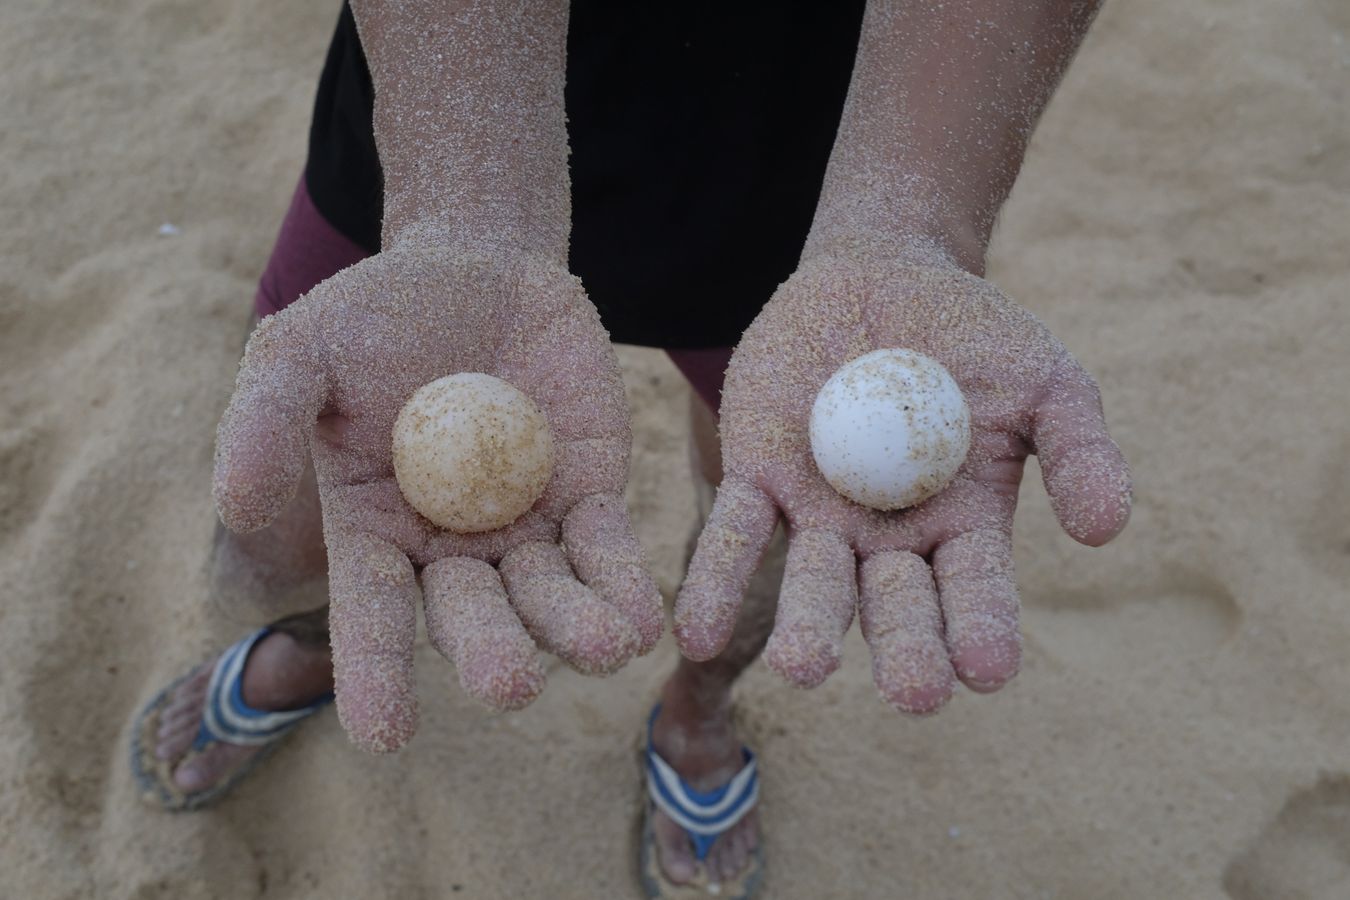 Two green turtle eggs: the one on the left that is more yellowish and soft is a recently laid egg, the one on the right that is whiter and harder is an egg that has been incubated for some time. 